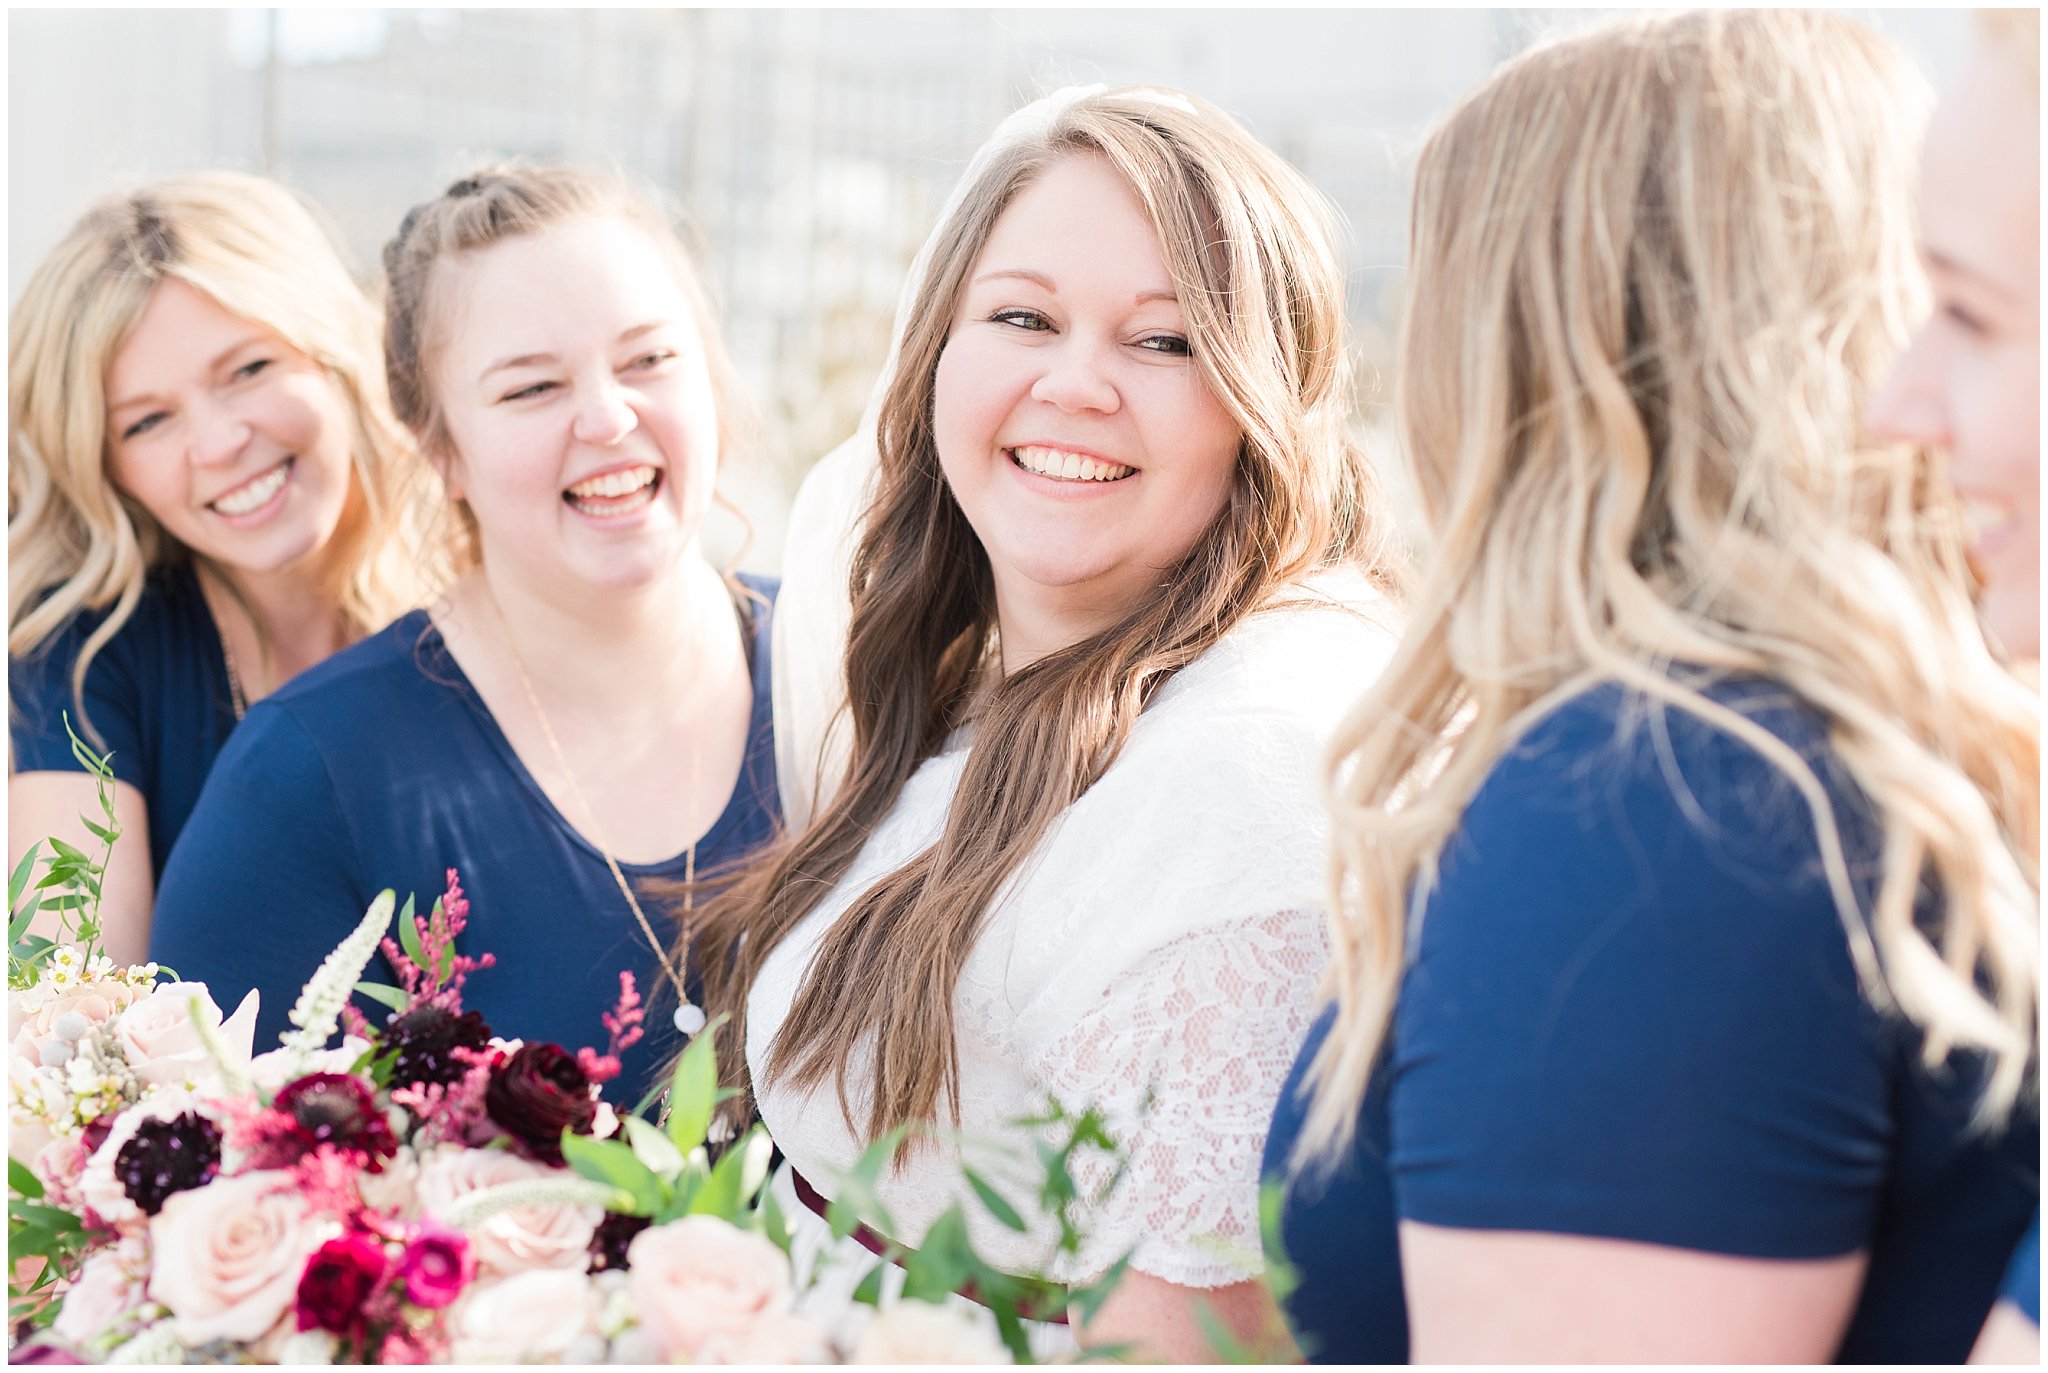 Bridal party photos in navy maxi dresses and burgundy ties at the Jordan River Temple | Burgundy and quicksand rose bouquets | Jordan River Temple Winter Wedding | Jessie and Dallin Photography